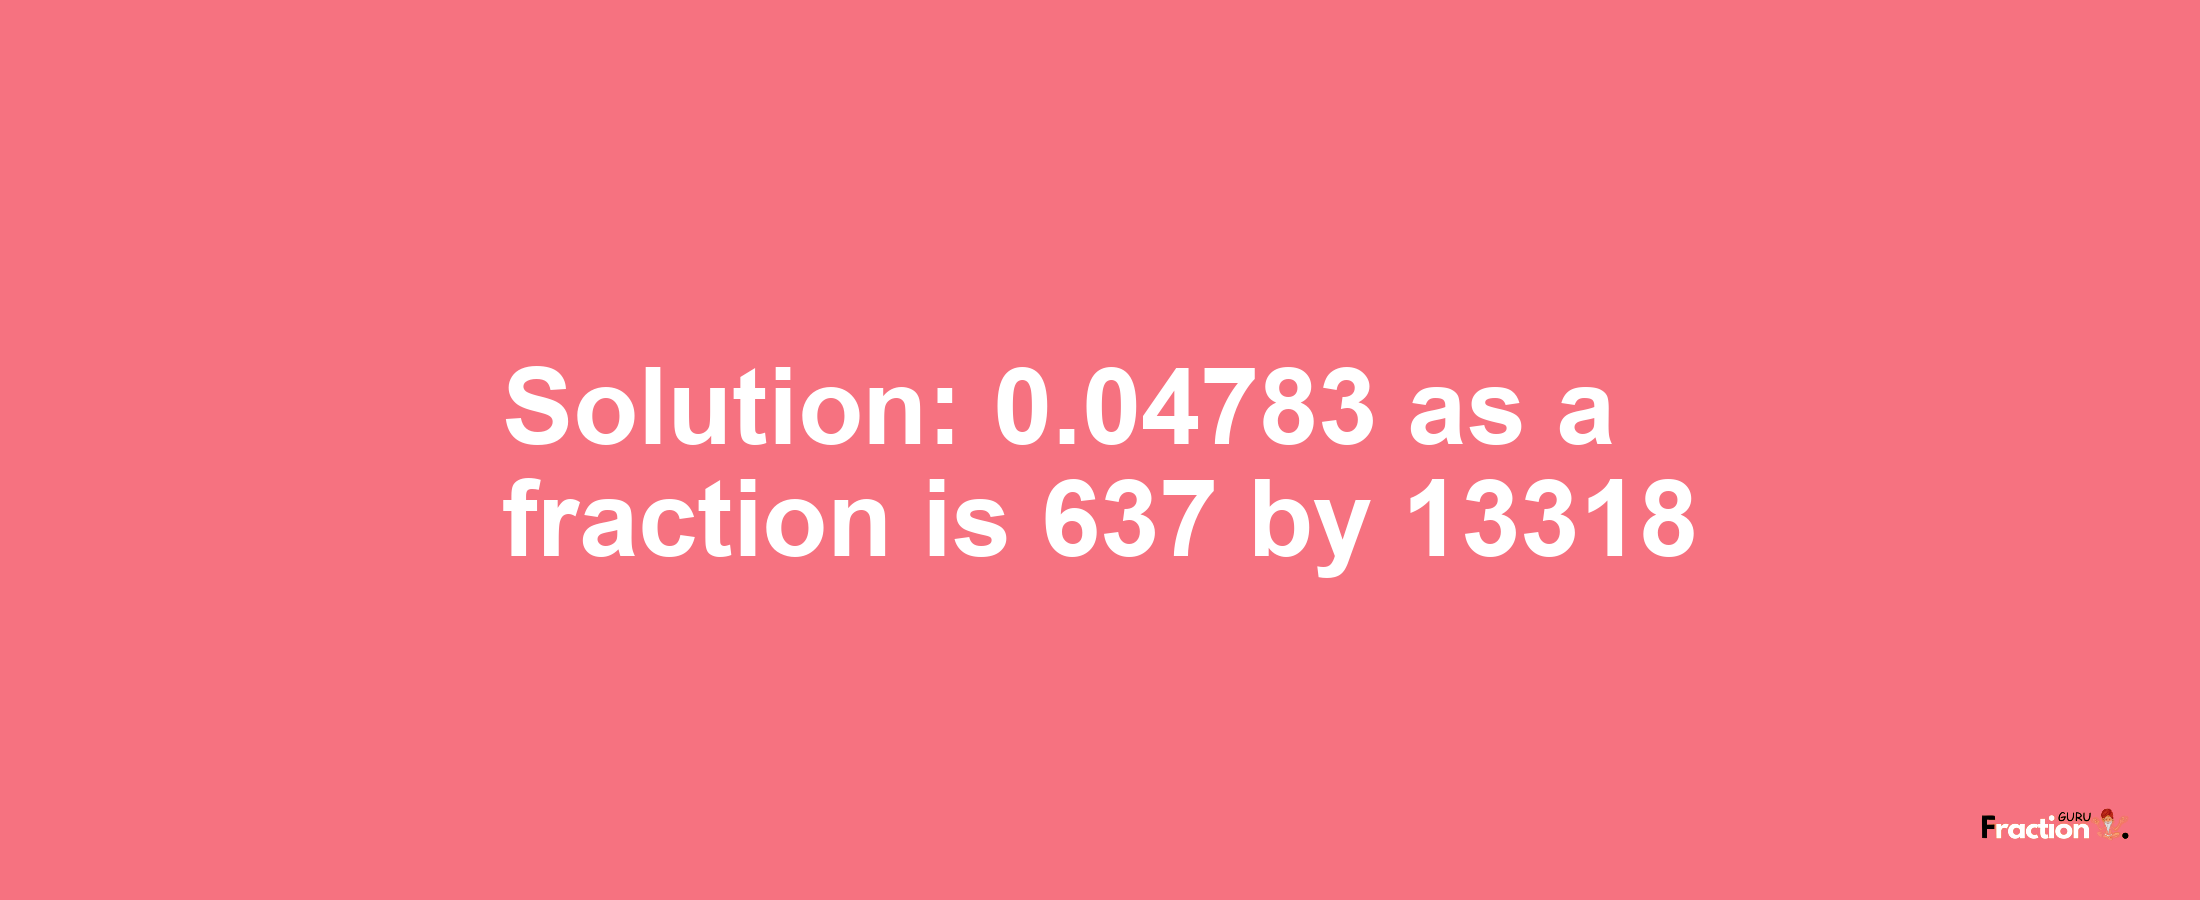 Solution:0.04783 as a fraction is 637/13318